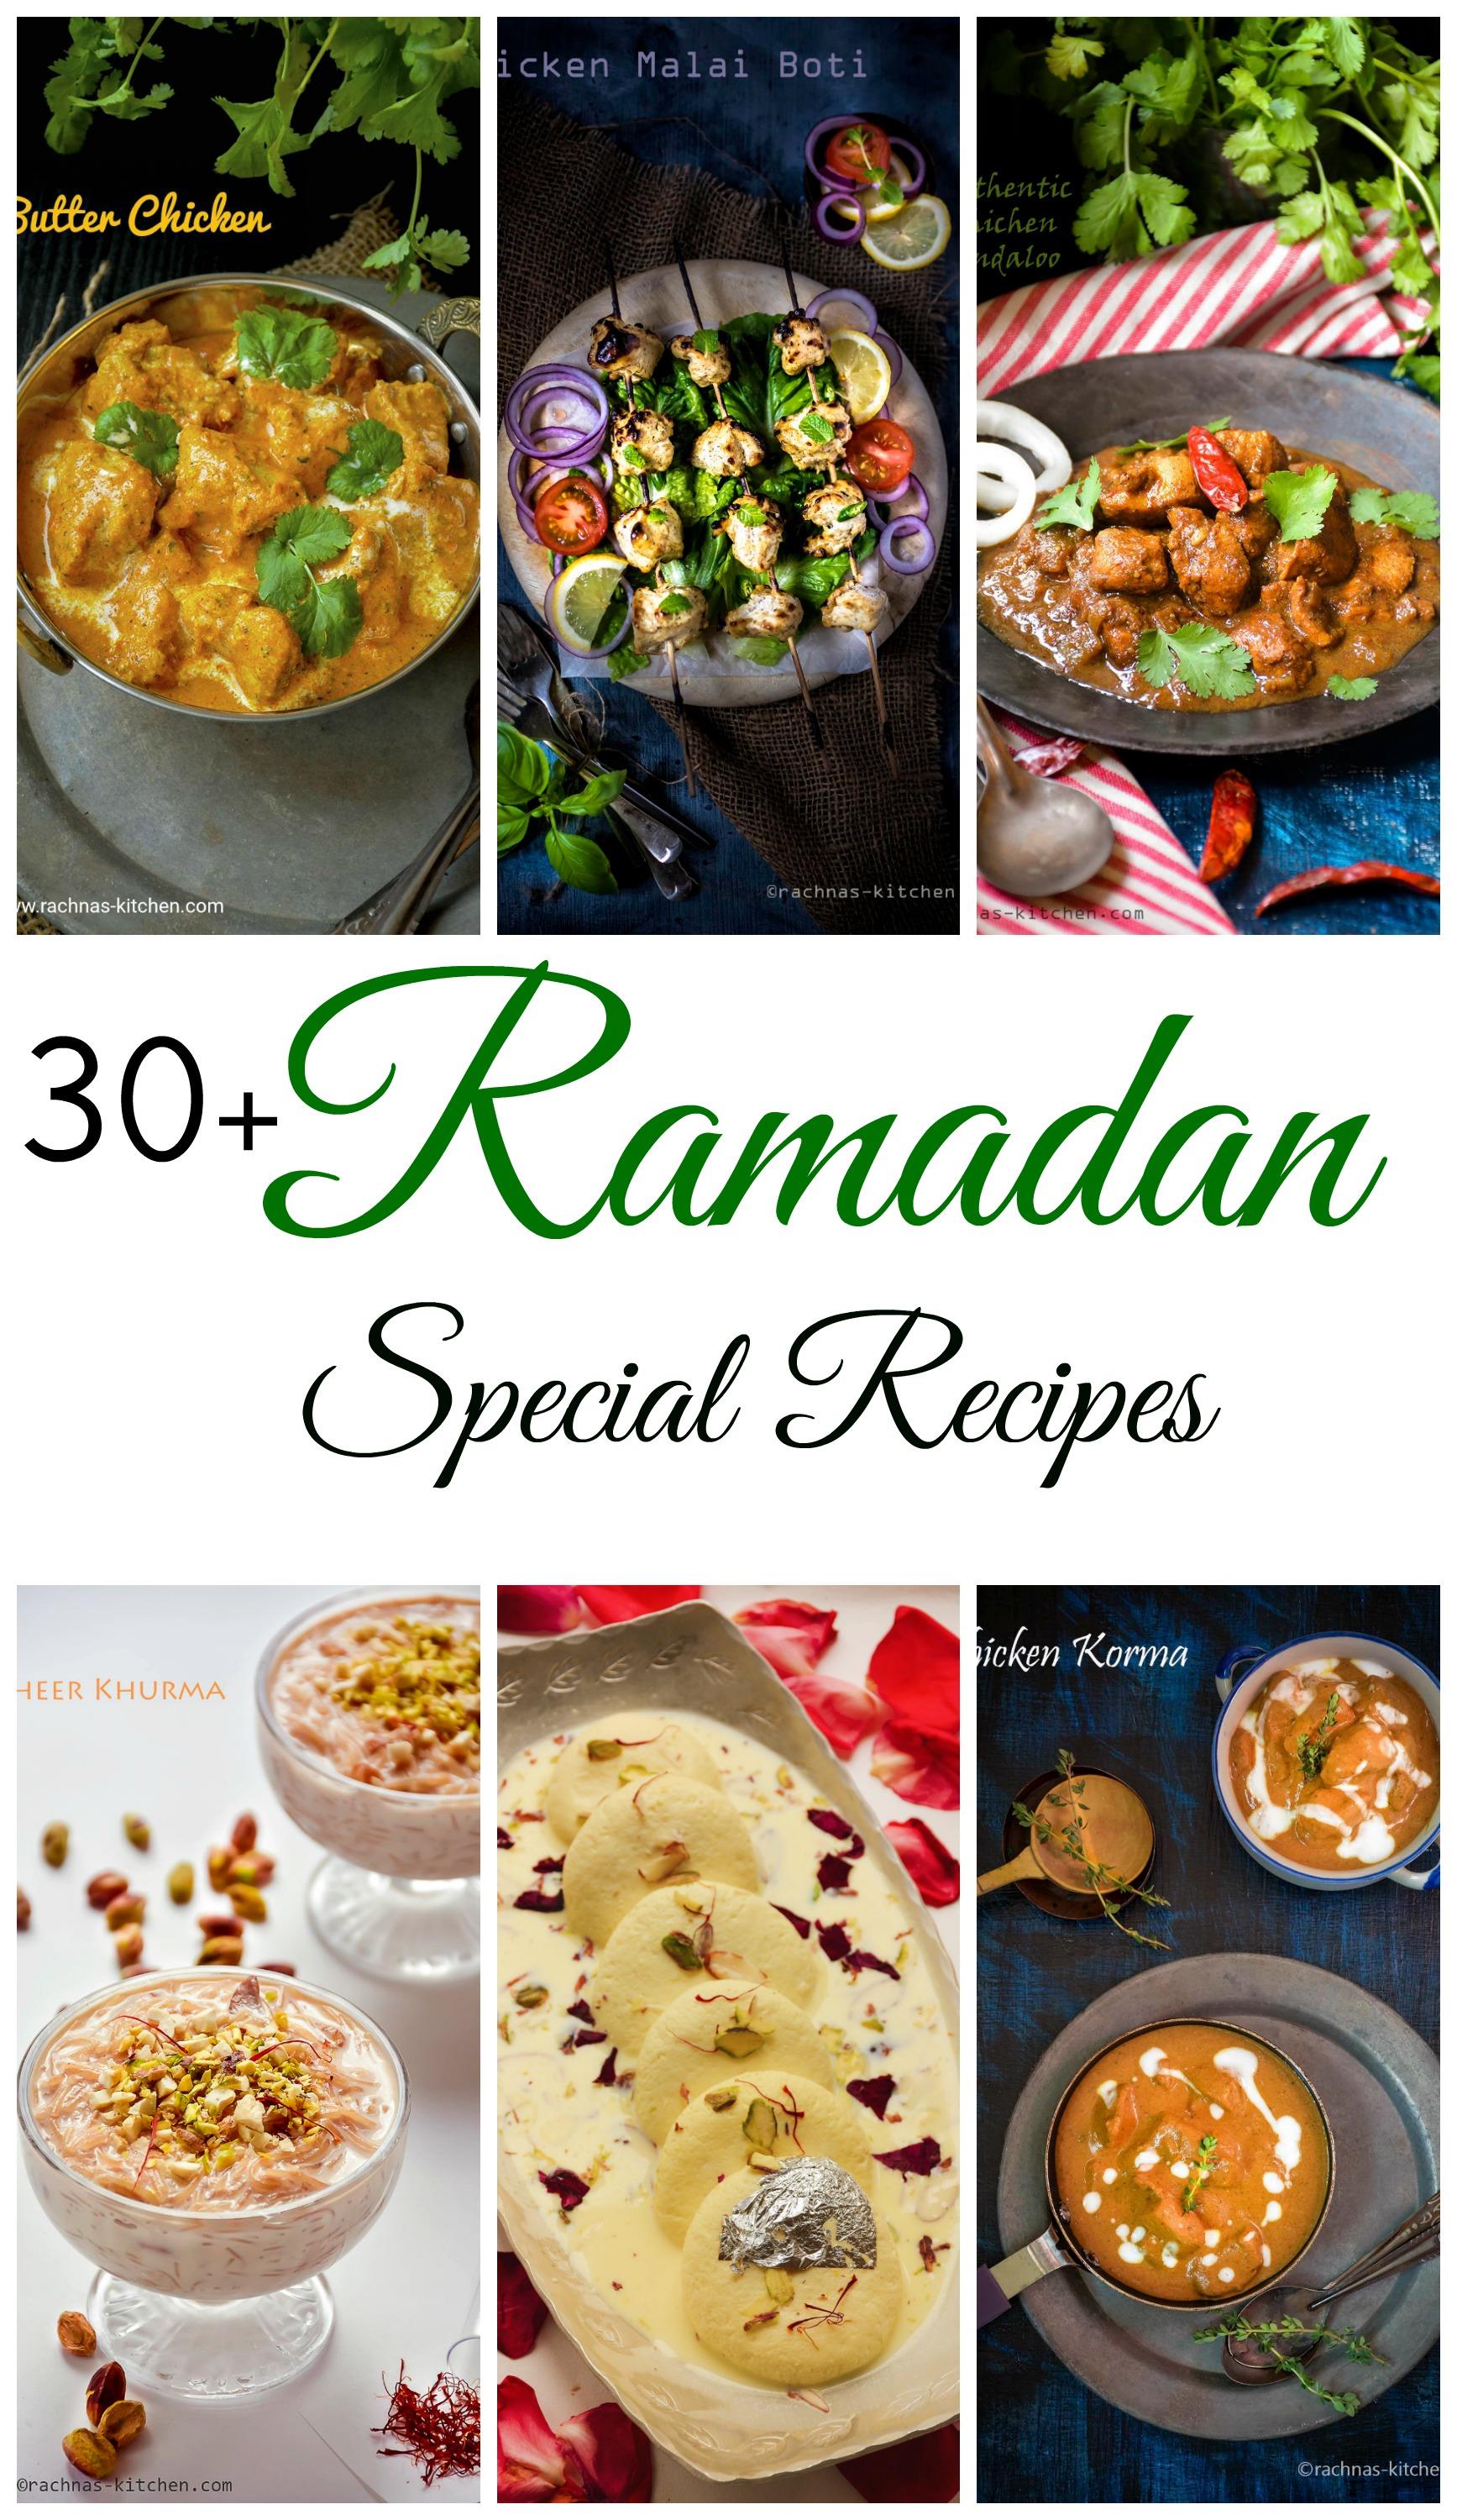 The 23 Best Ideas for Arabic Food Recipes Main Dishes - Home, Family